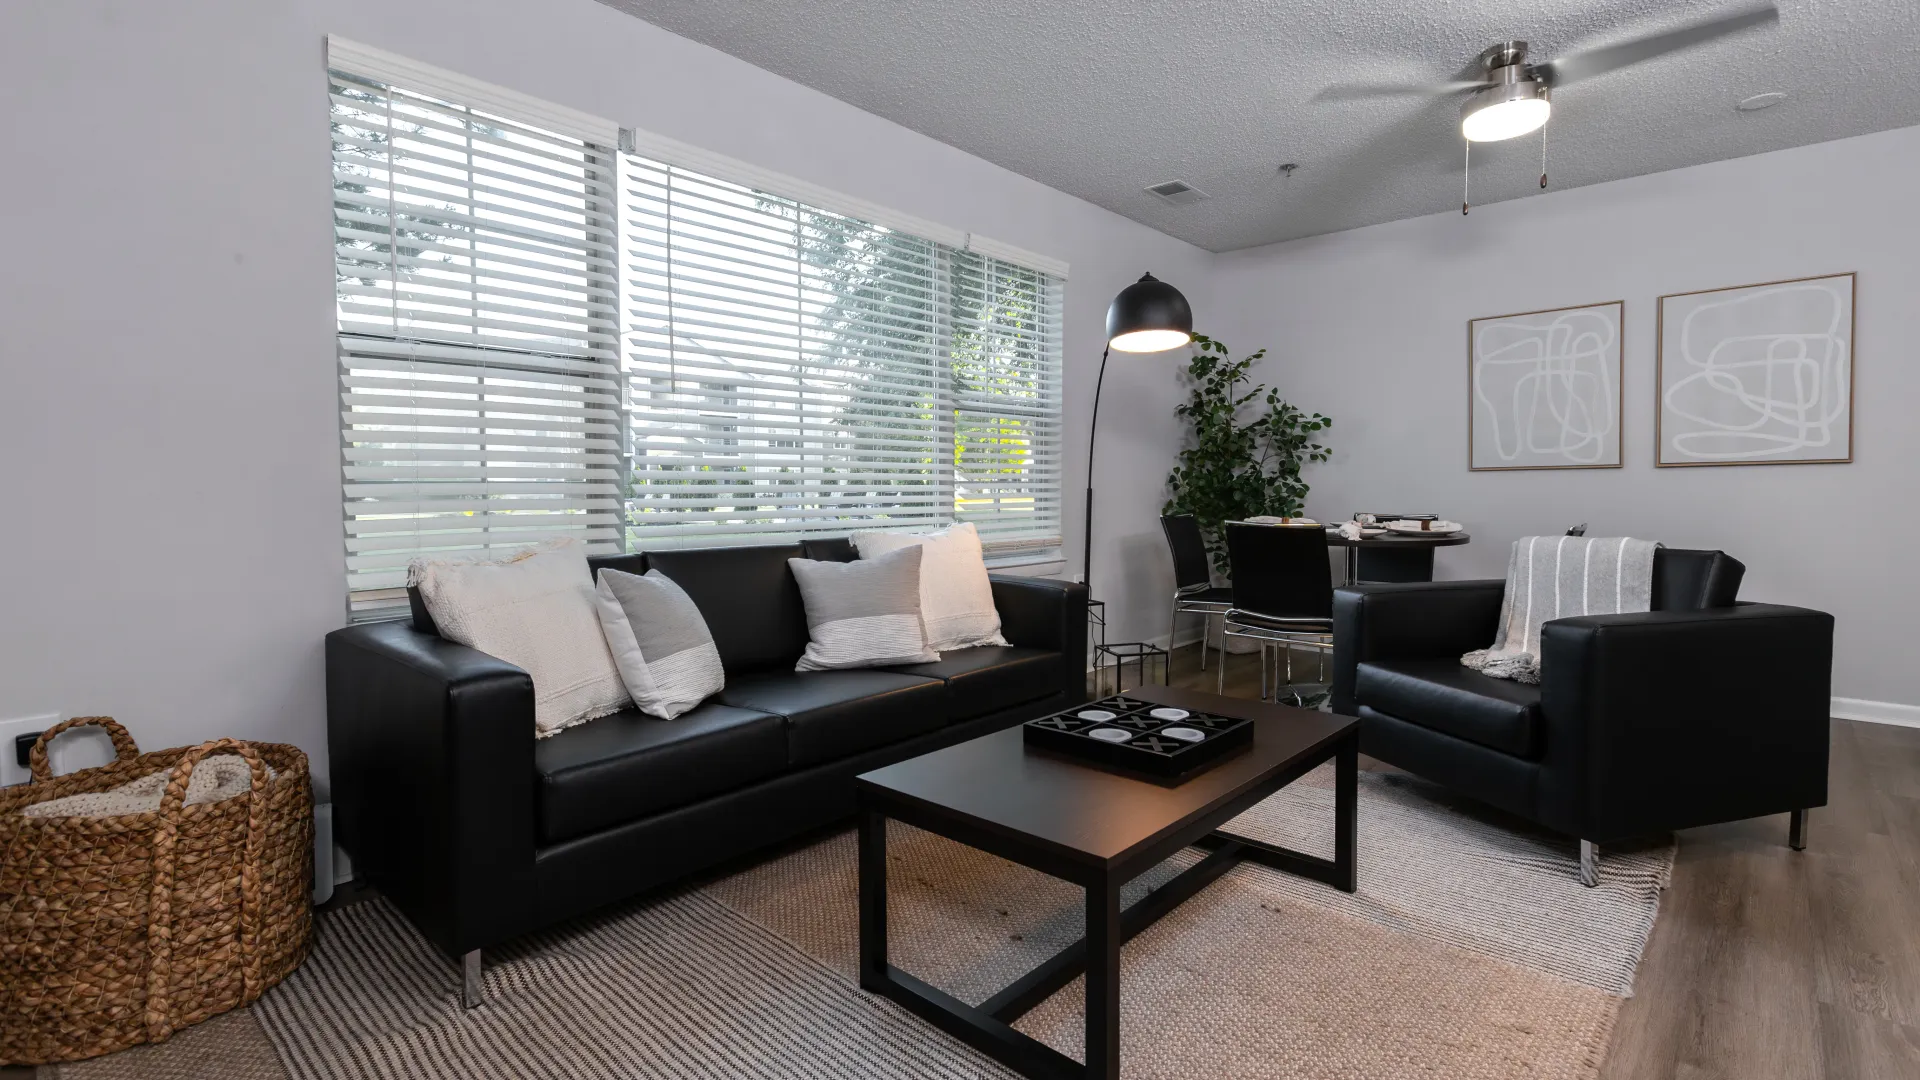 Cozy and stylish living room at Onyx Apartments featuring modern decor, ample natural light, and a comfortable seating arrangement with a sofa, armchair, and coffee table.